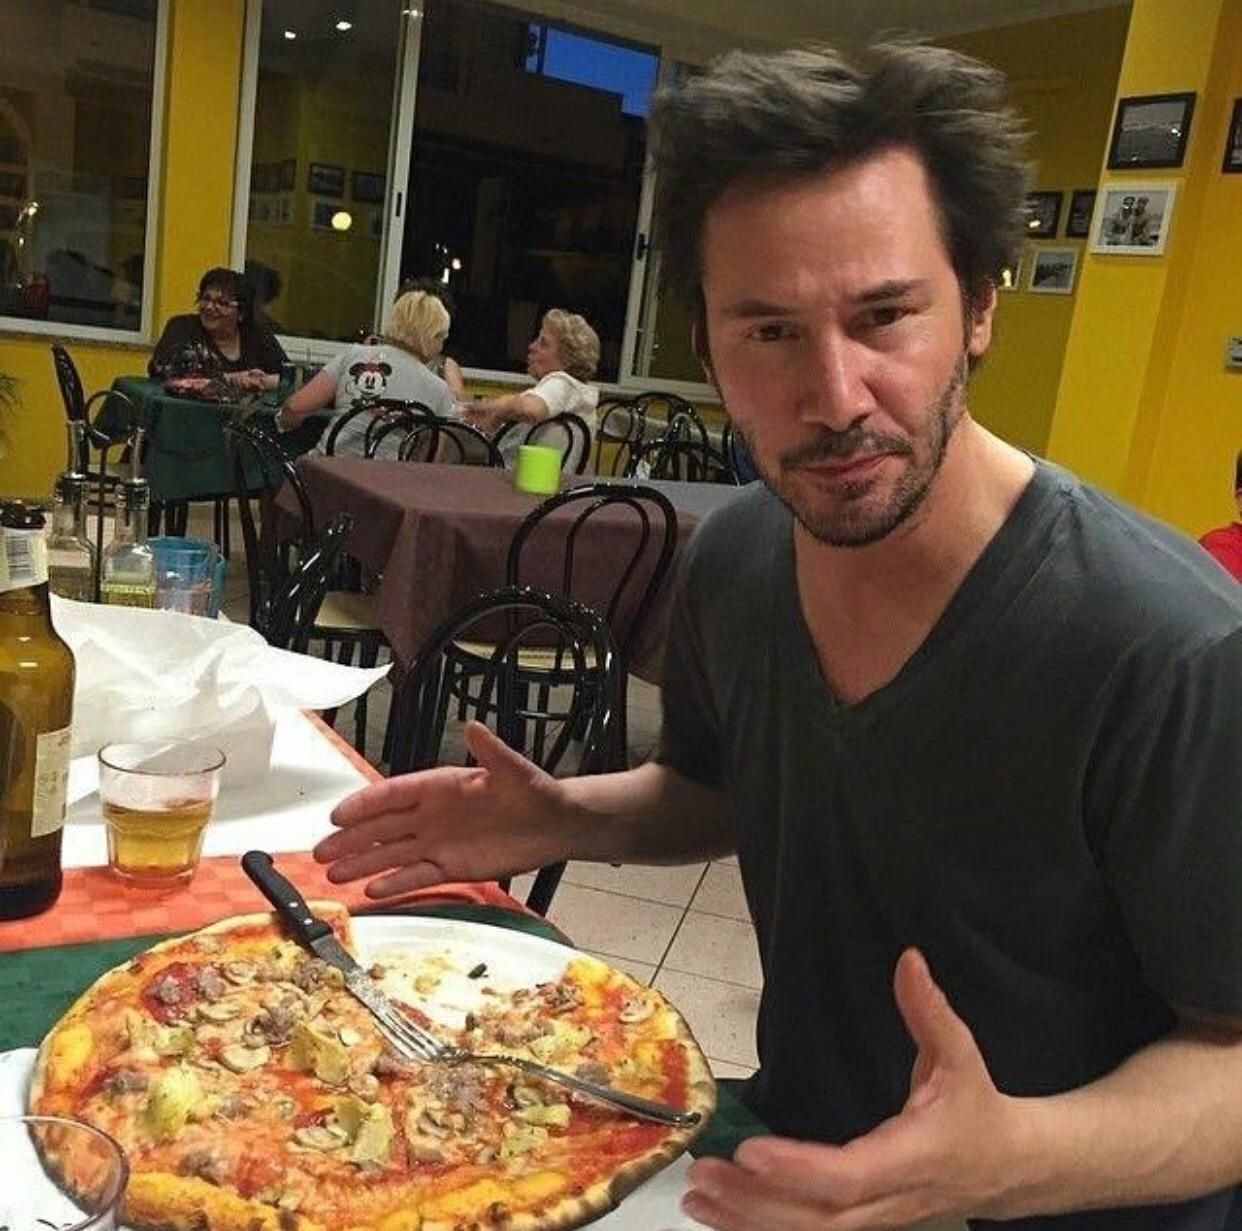 The only person that’s allowed to eat pizza with a knife and fork